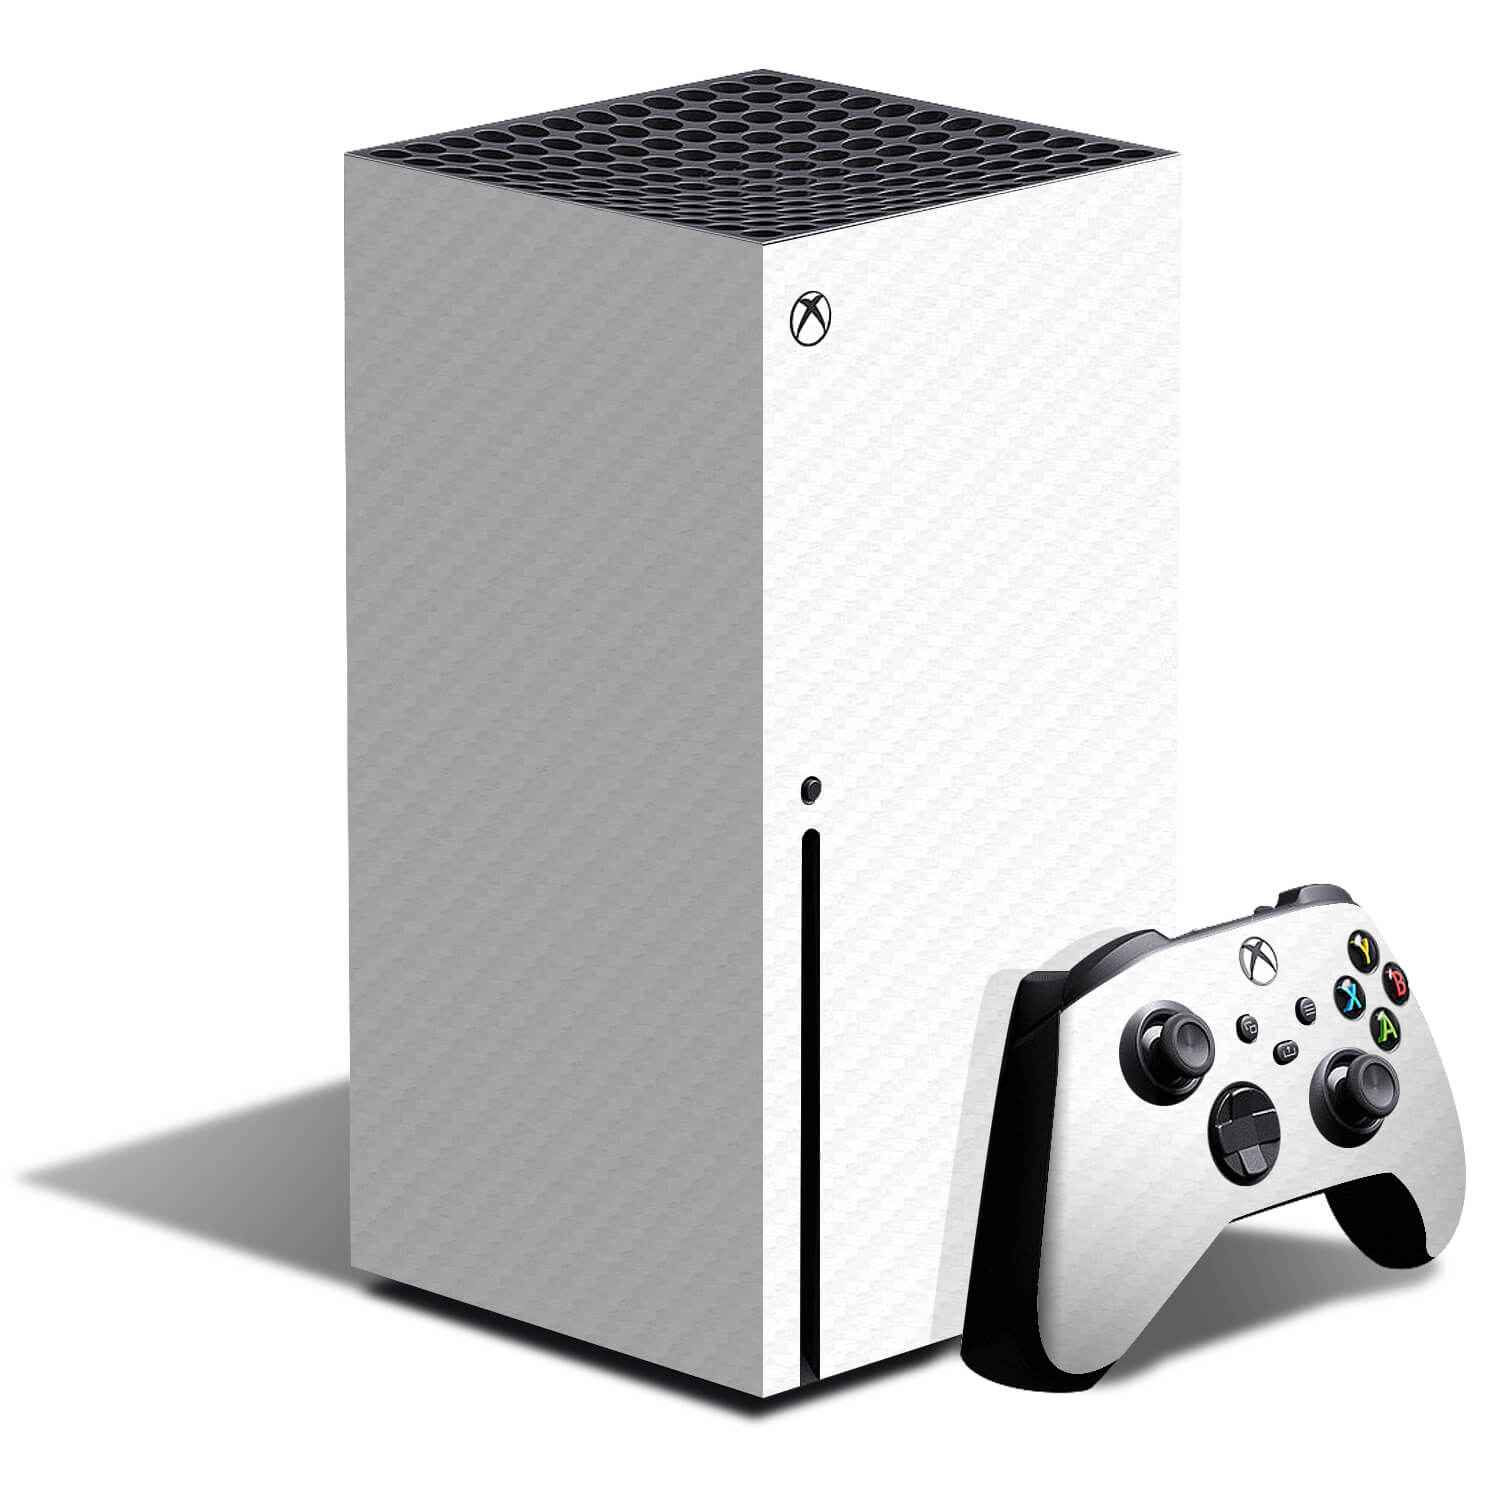 rose gold series x xbox one